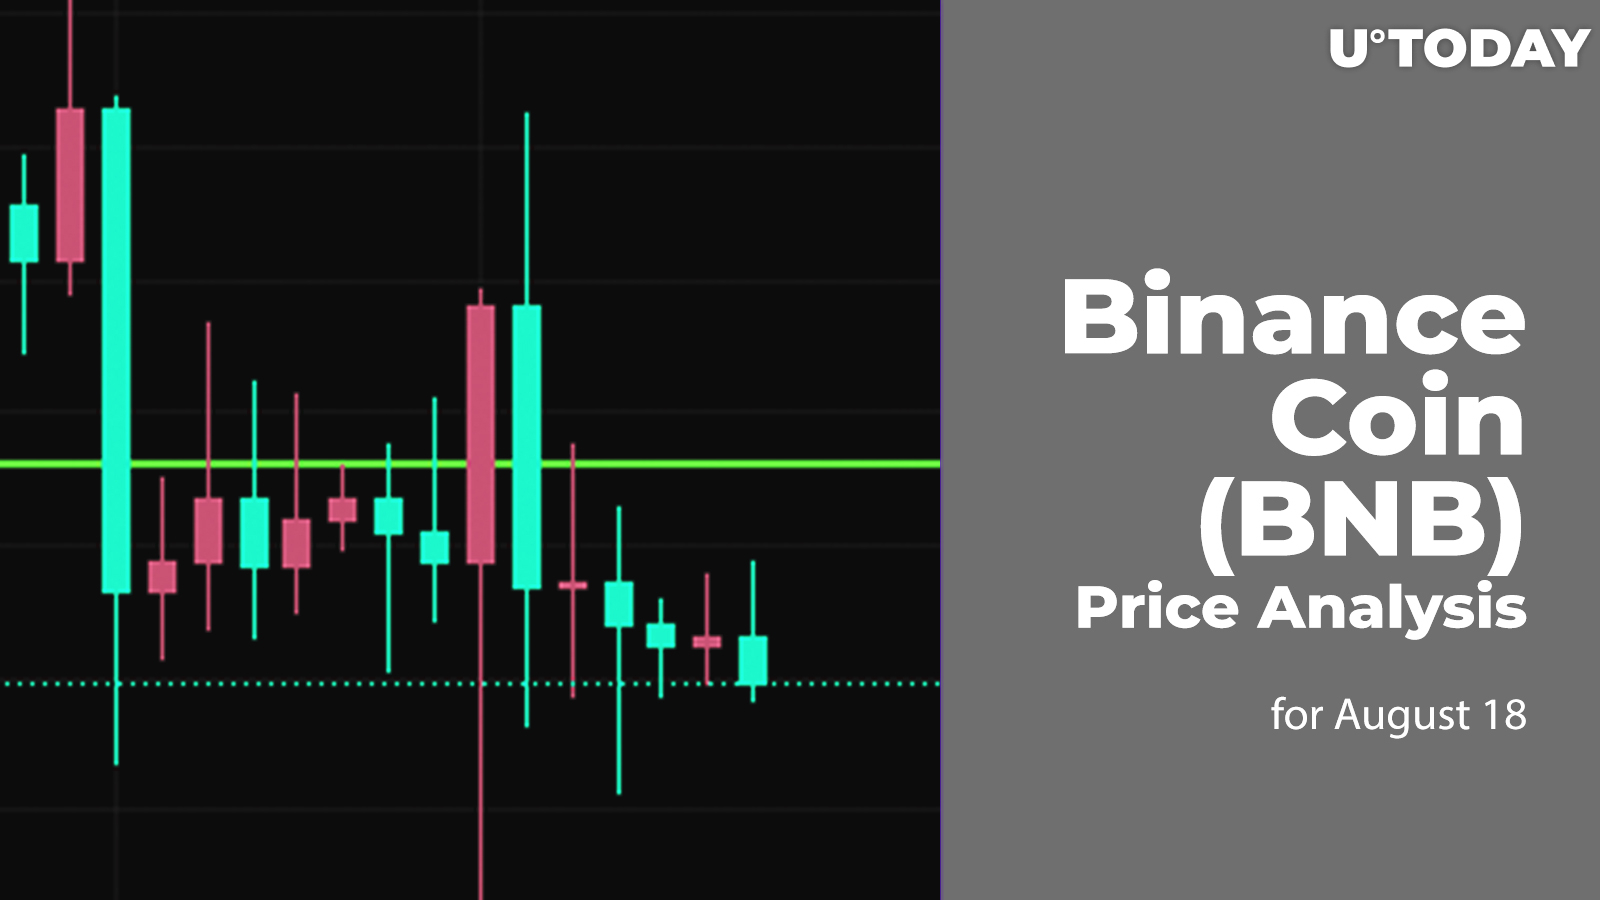 Binance Coin (BNB) Price Analysis for August 18